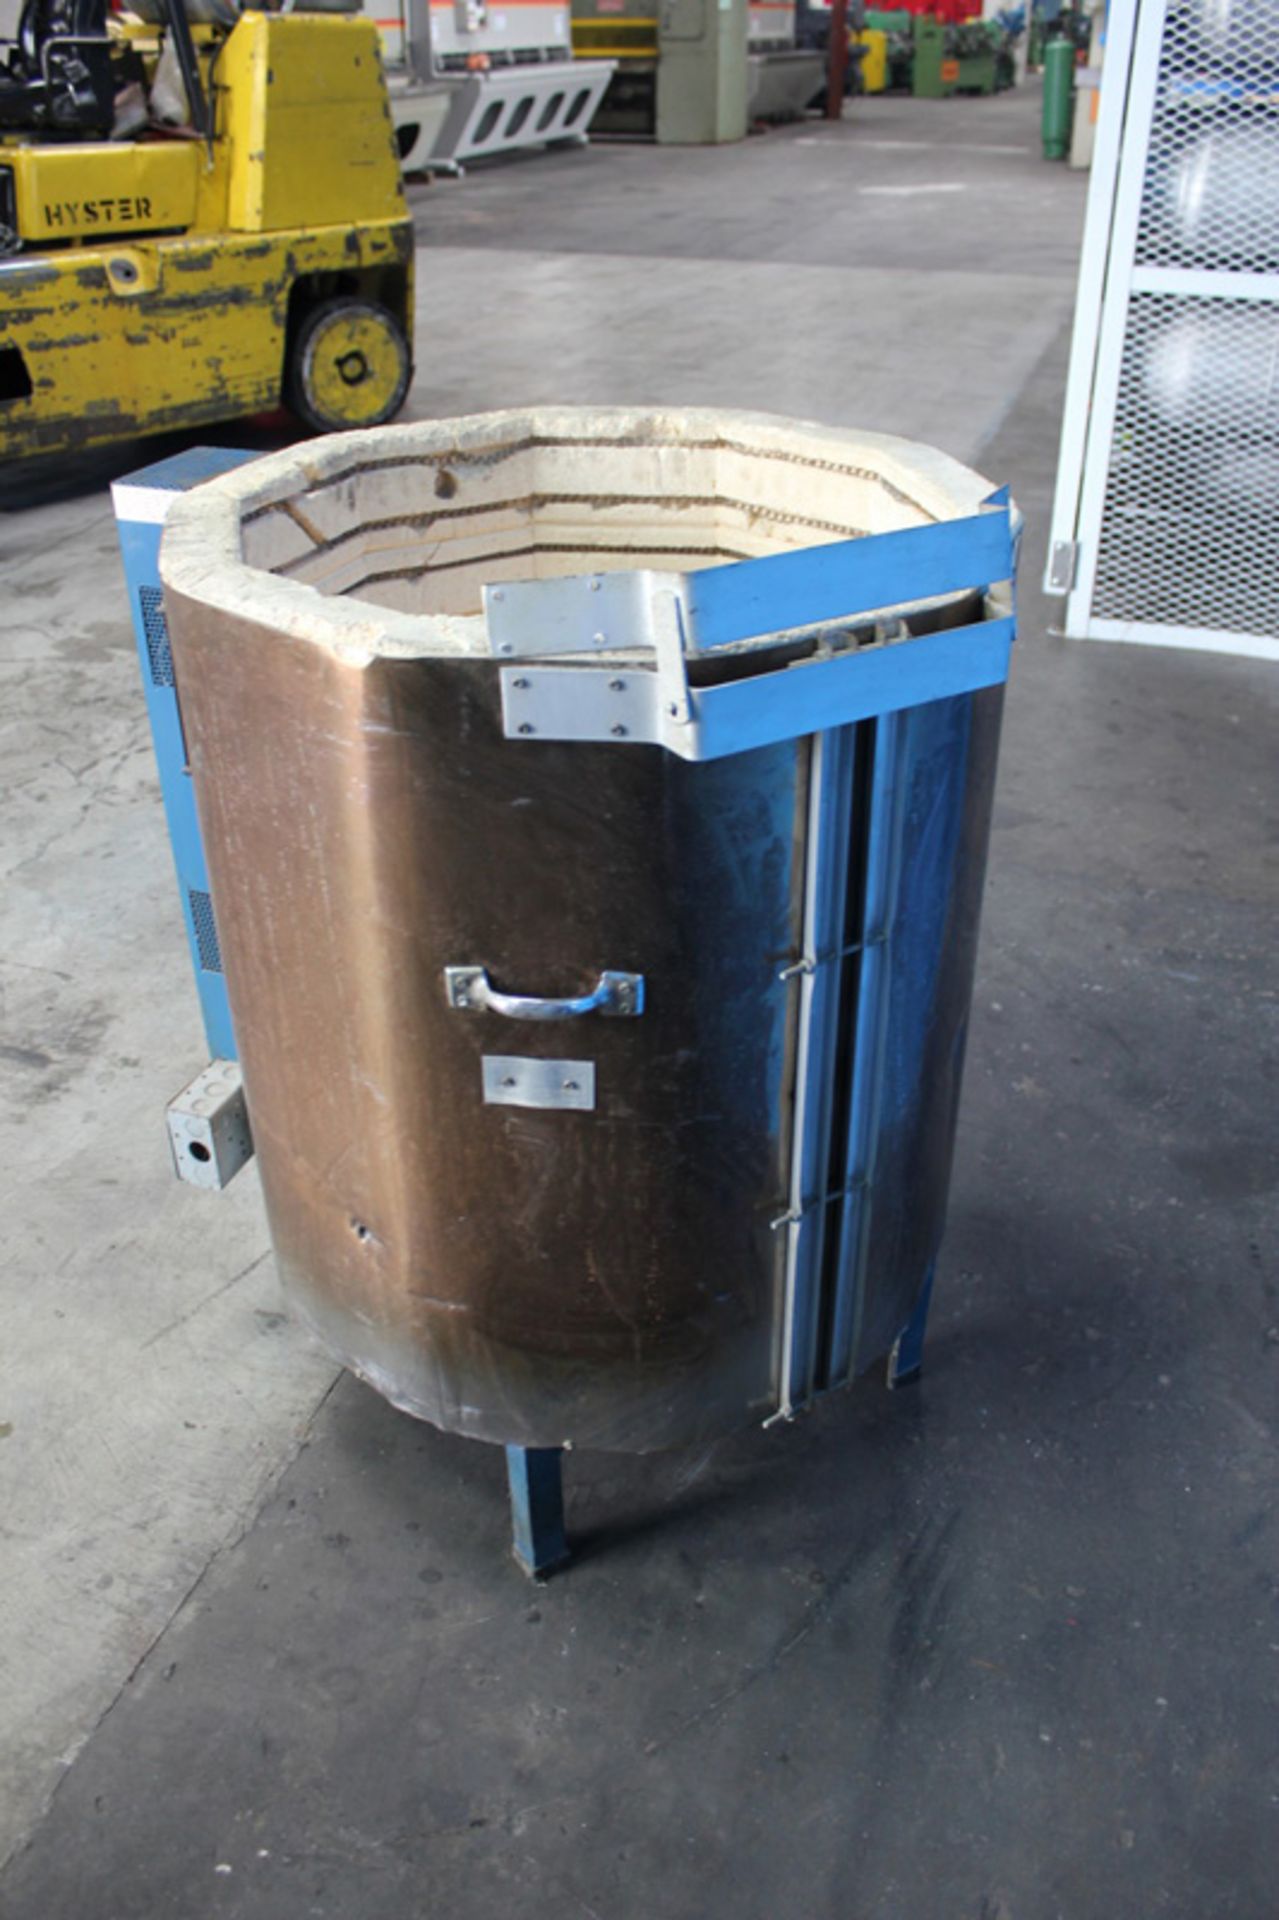 Cress Electric Kiln | 7 Cubic Feet, Located In: Huntington Park, CA - 5216 - Image 4 of 5